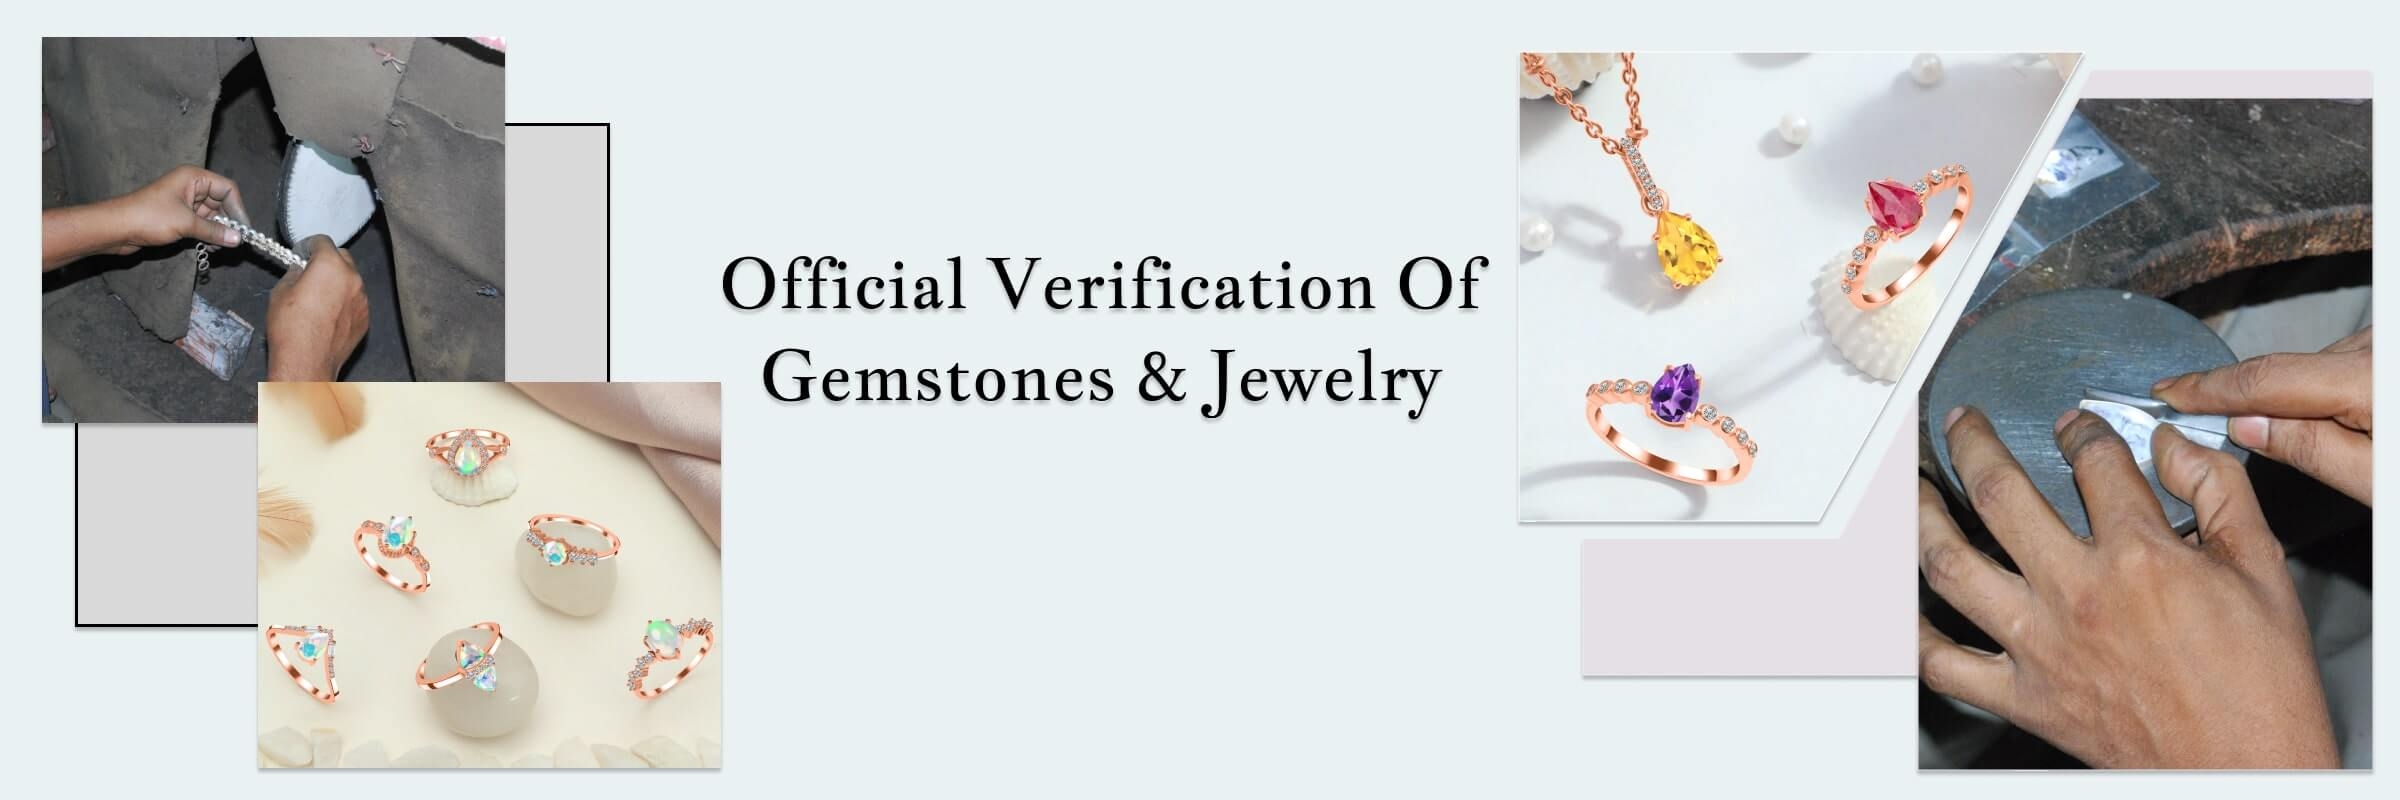 Standardized Authority Certifications Of Real Gemstones and Jewelry